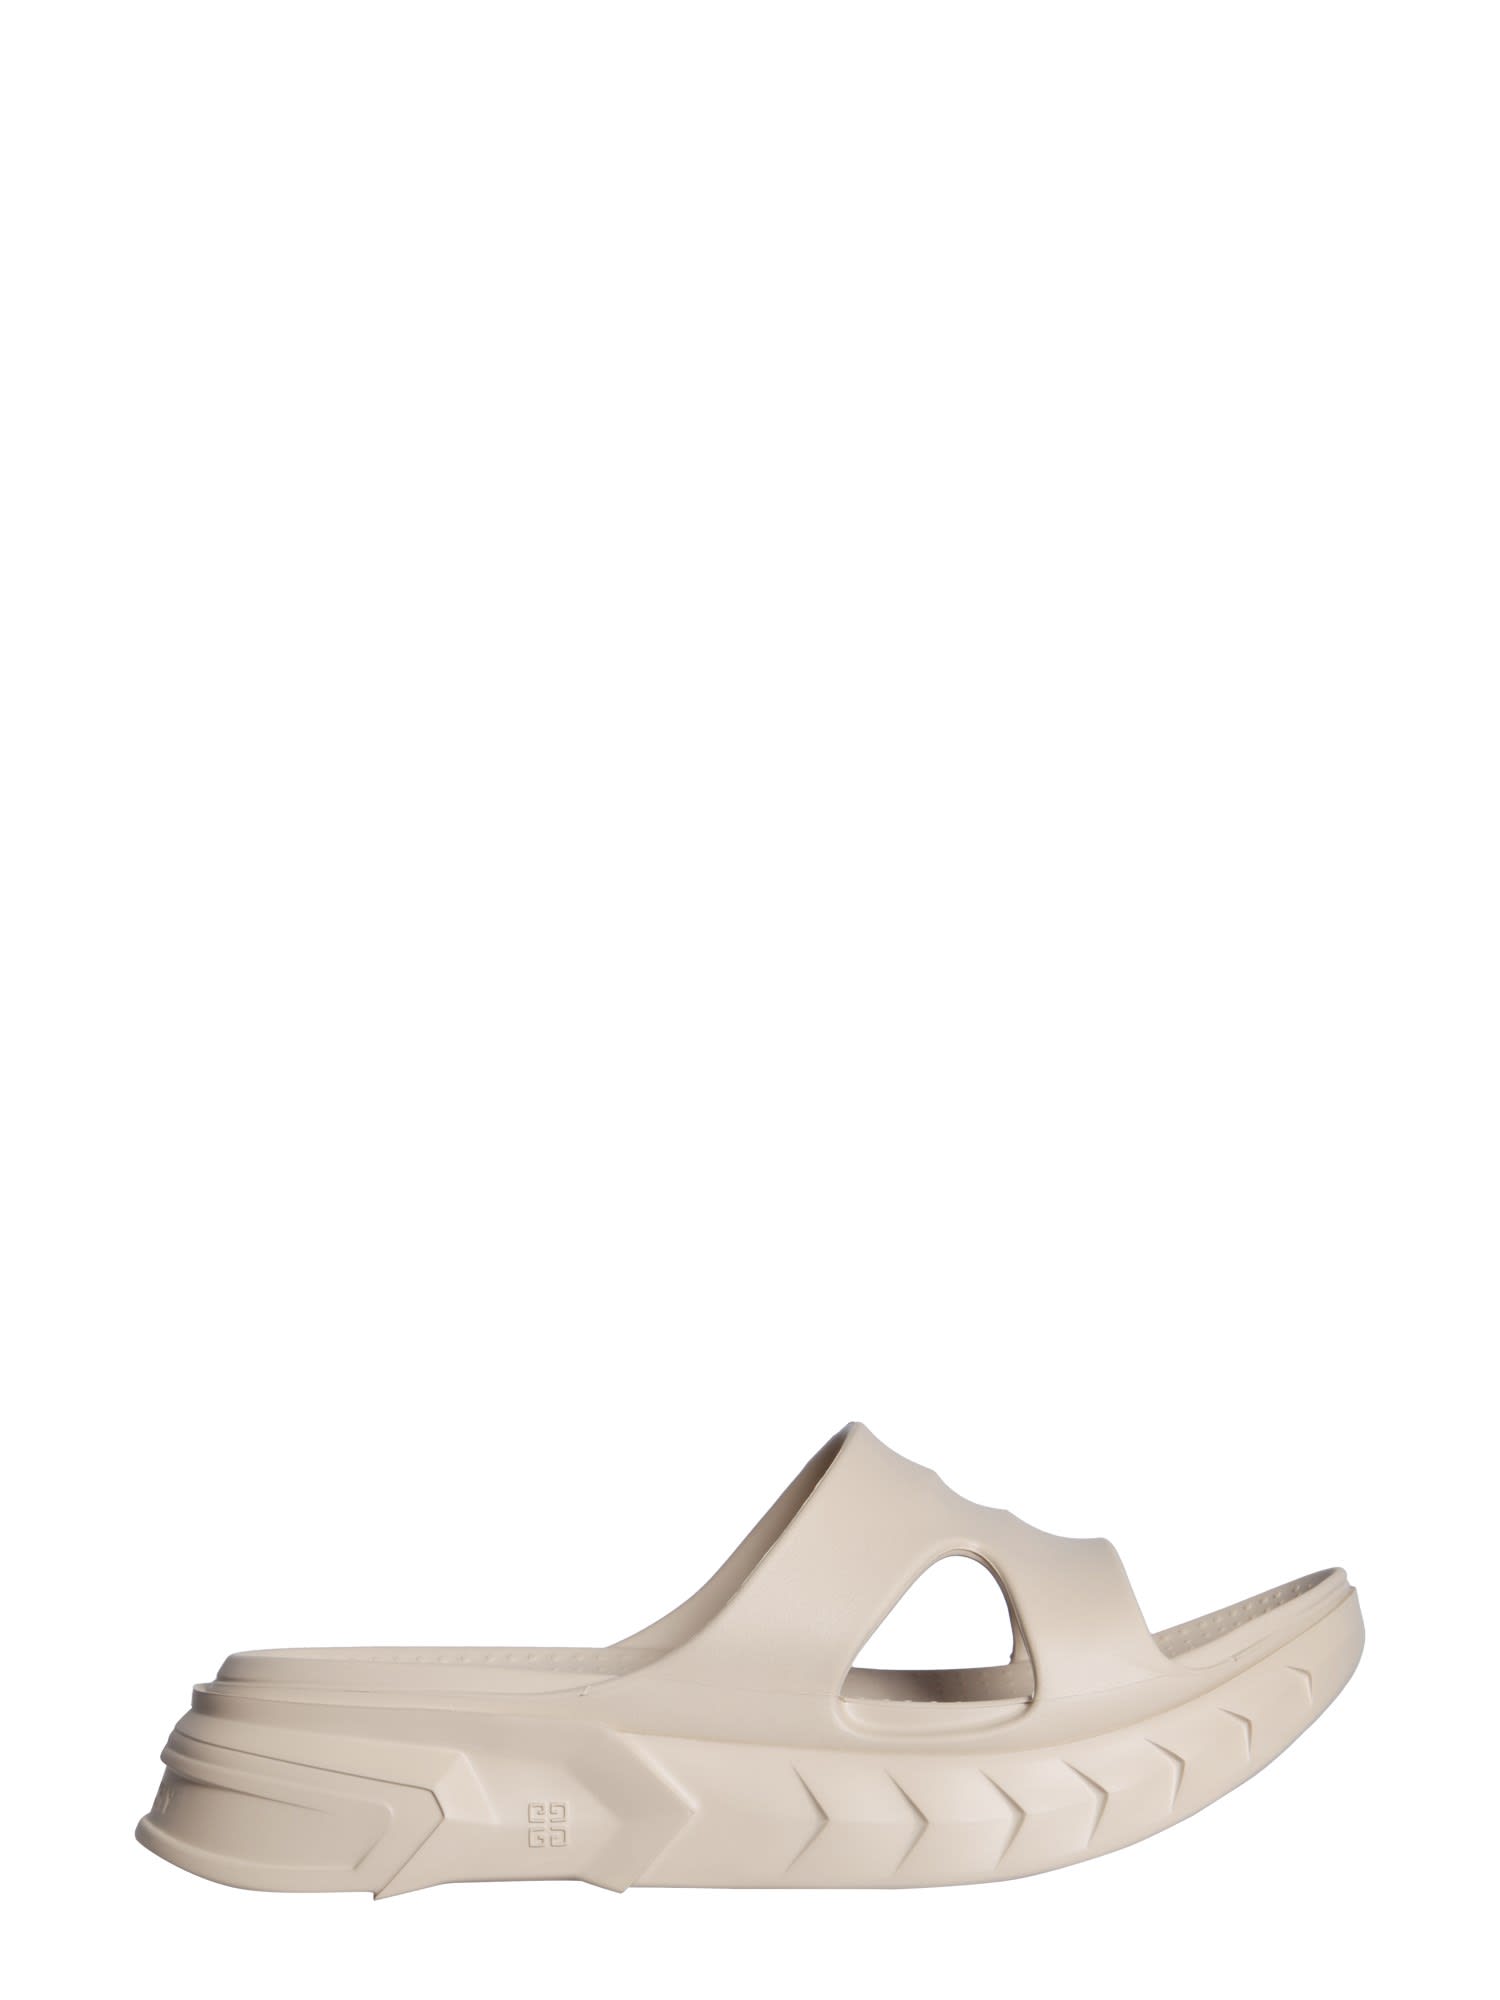 GIVENCHY MARSHMALLOW SANDALS,BE305AE0YB 285